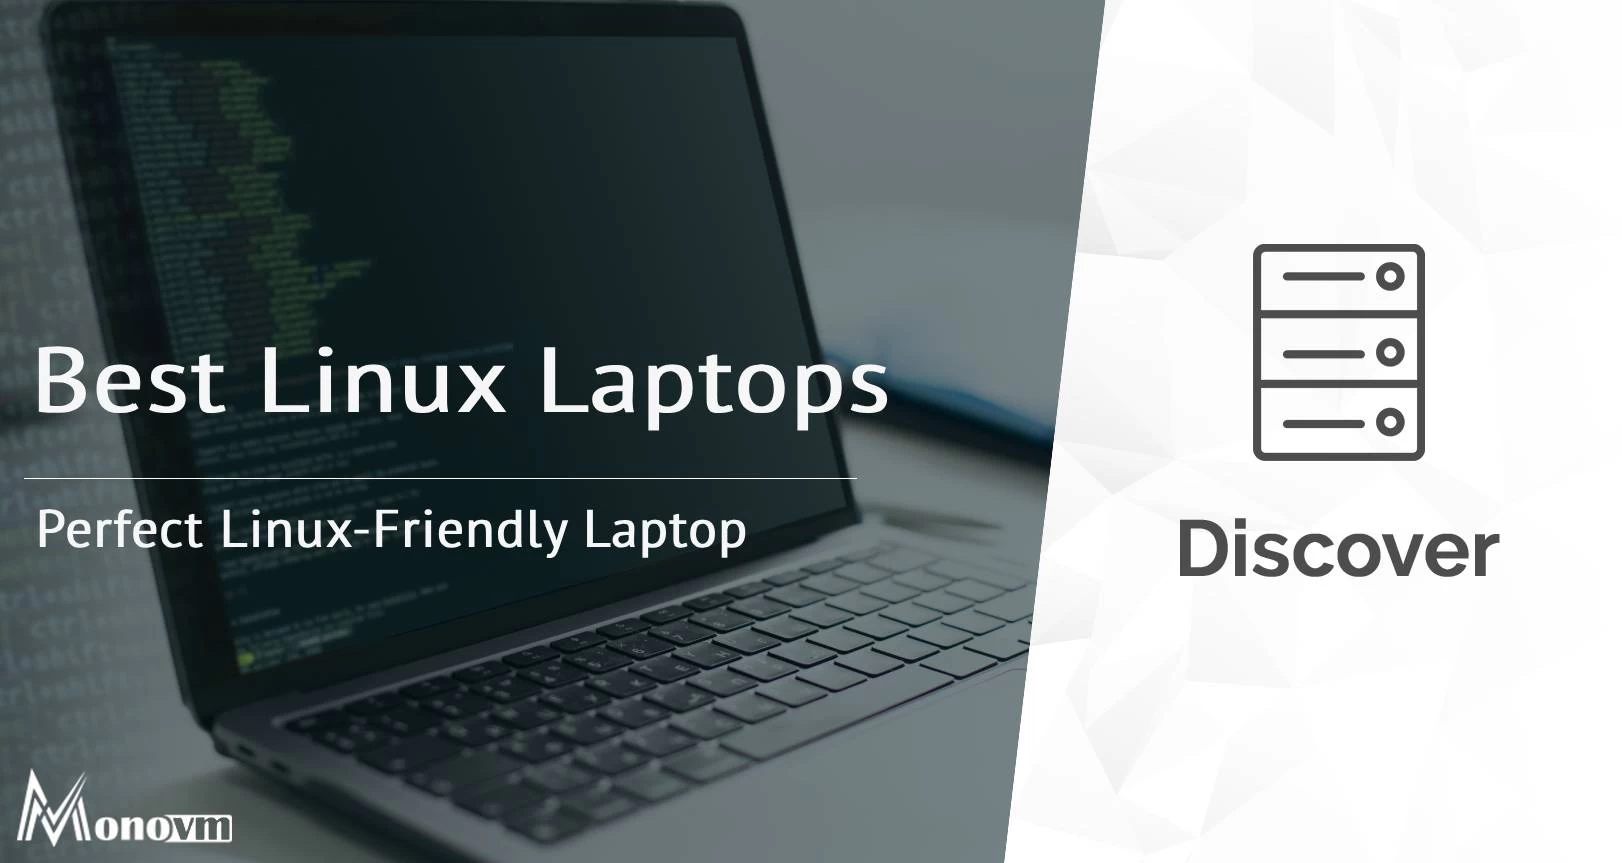 Best Linux Laptops: Your Guide to Finding the Perfect Linux-Friendly Laptop